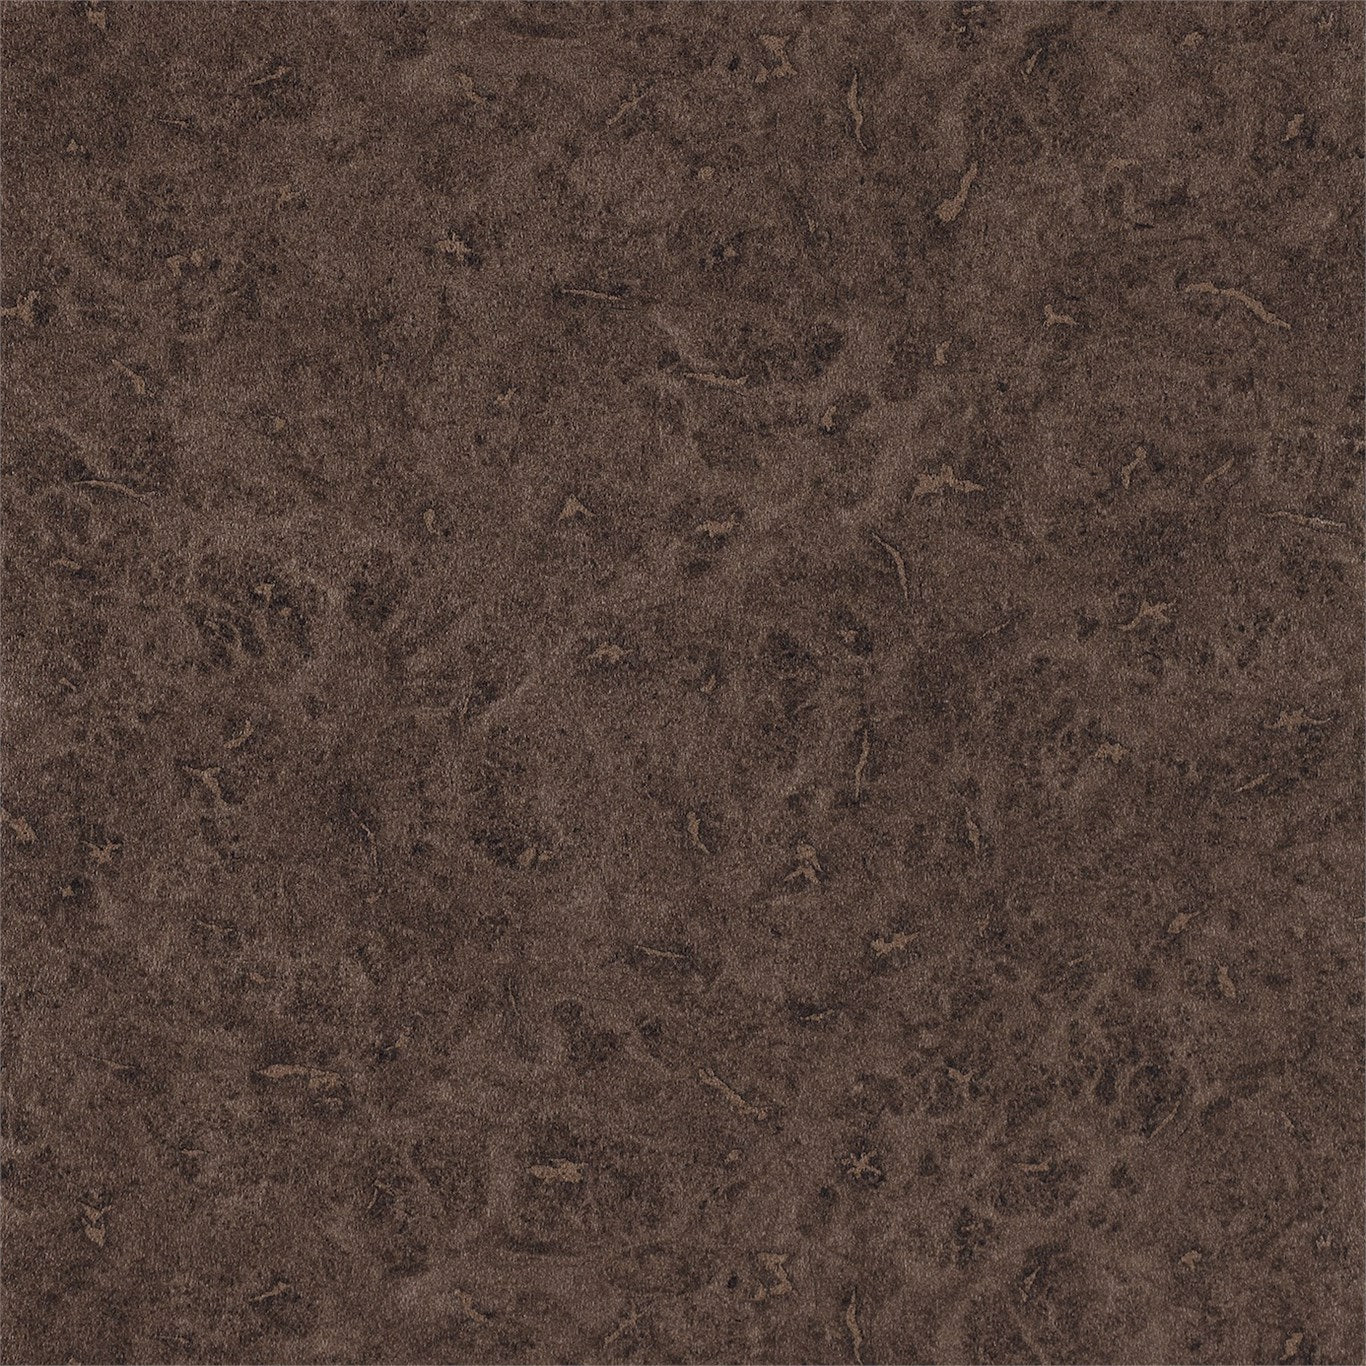 Lacquer Walnut Wallpaper EANT111133 by Harlequin